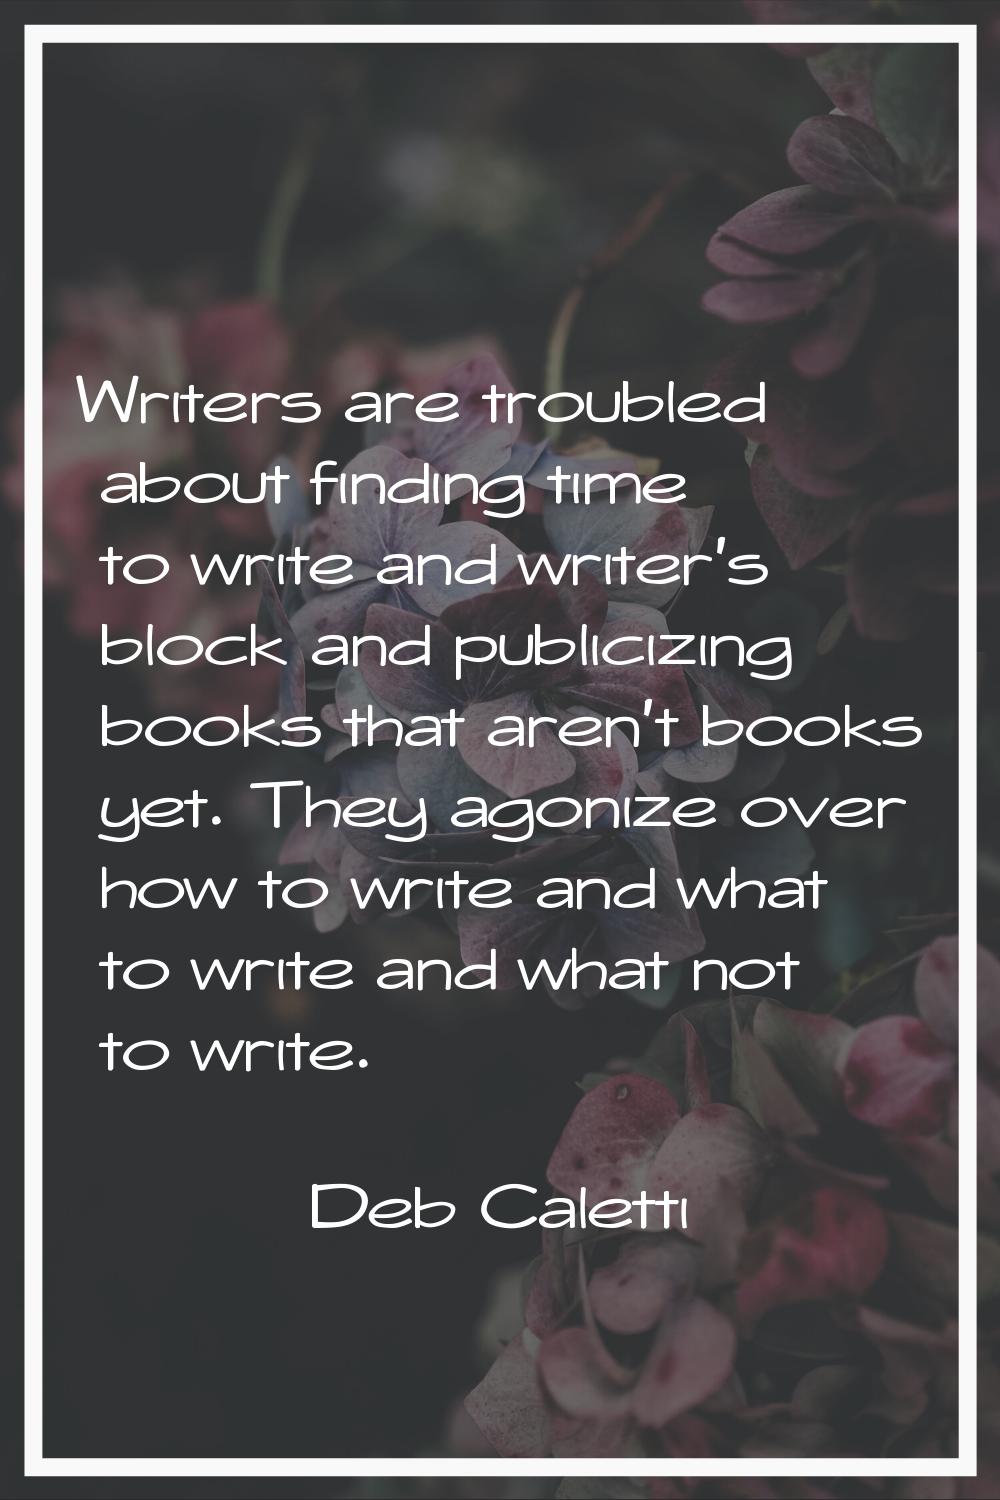 Writers are troubled about finding time to write and writer's block and publicizing books that aren